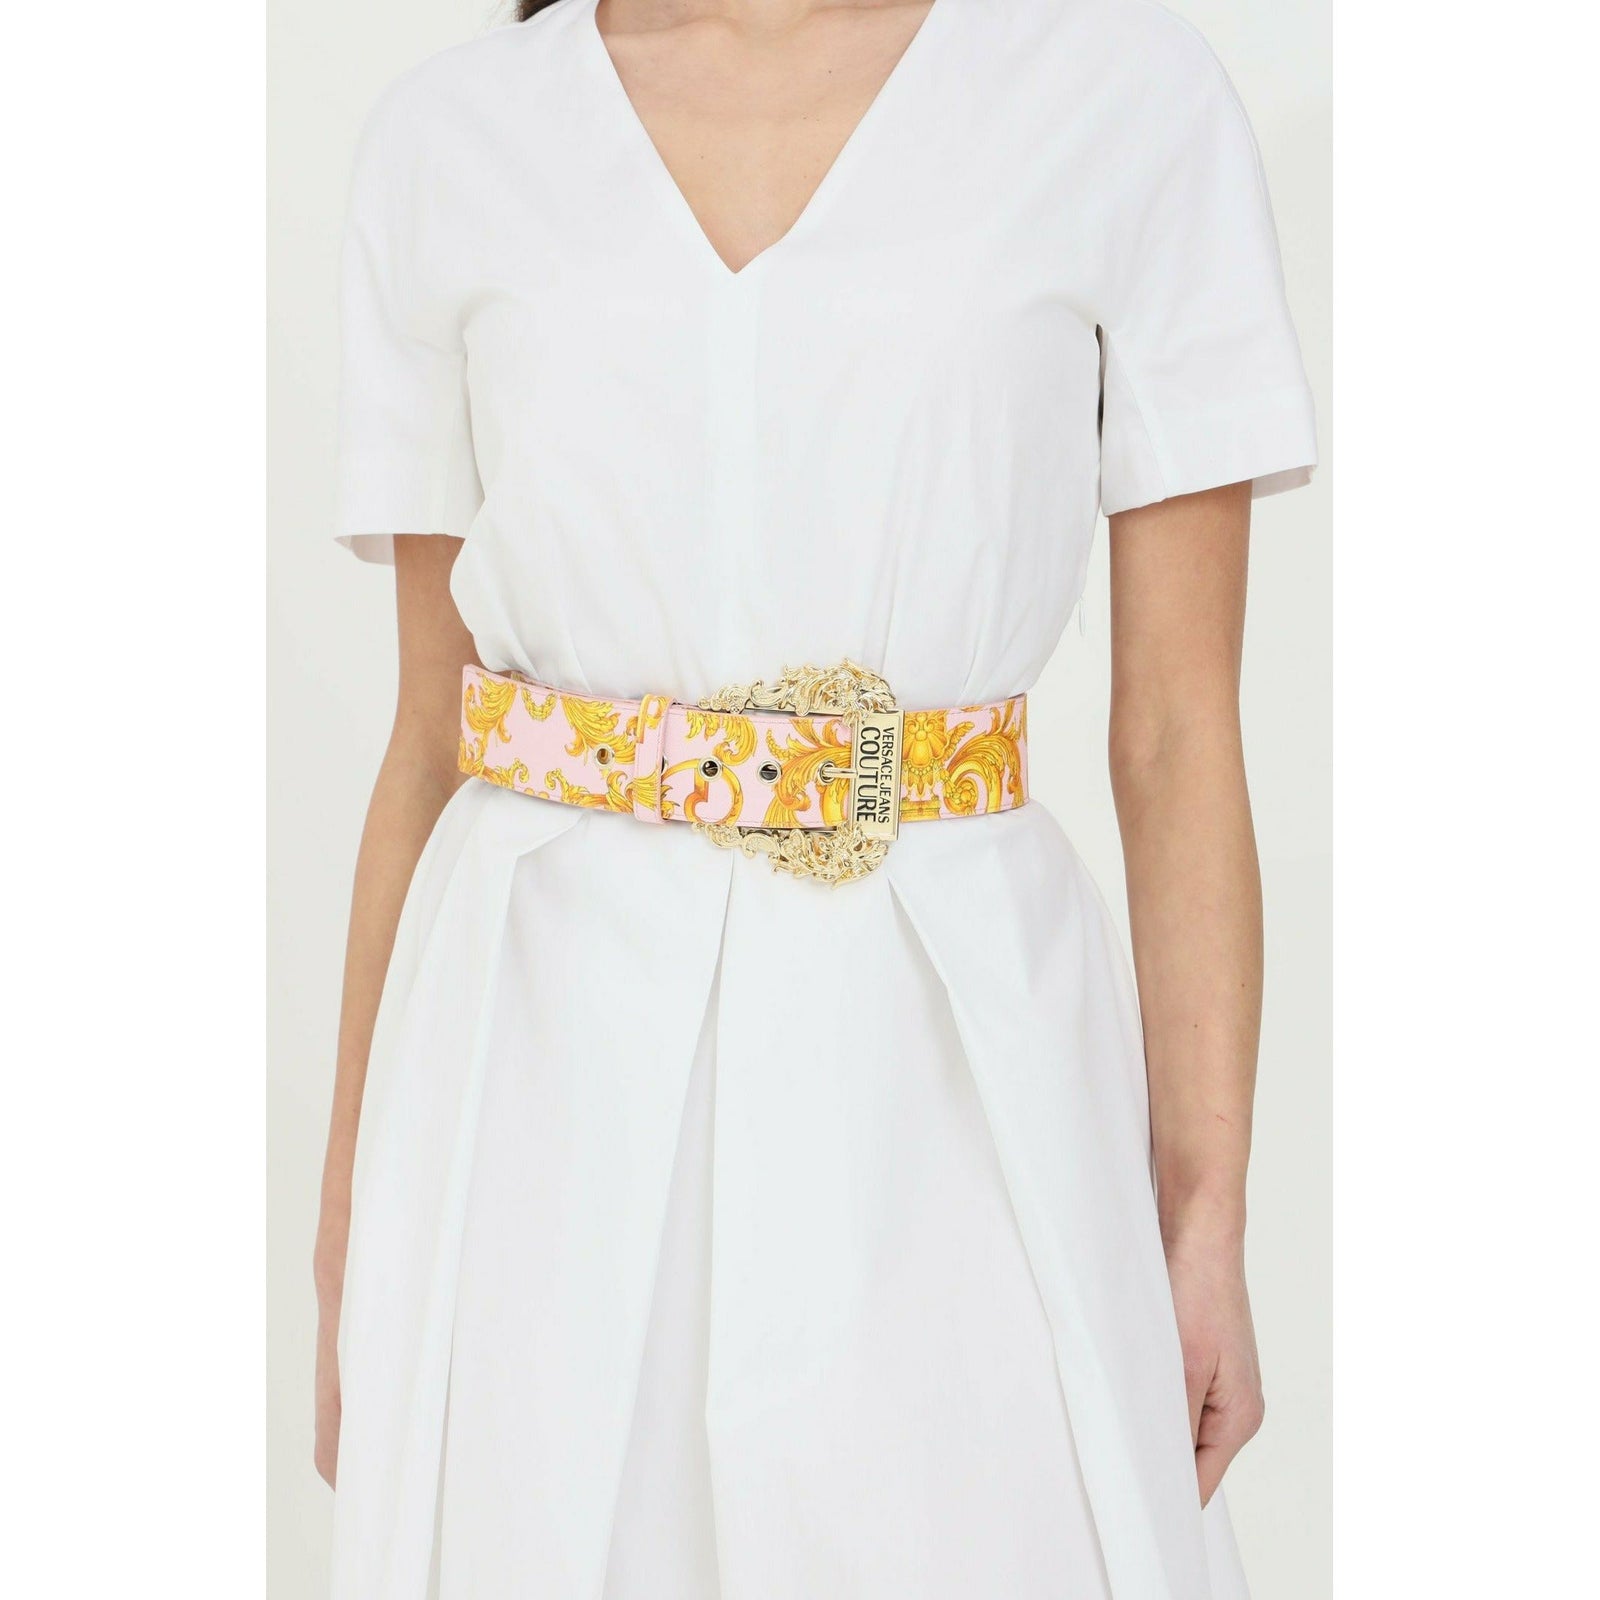 PATTERNED BELT WITH MAXI LIGHT GOLD BUCKLE - Yooto